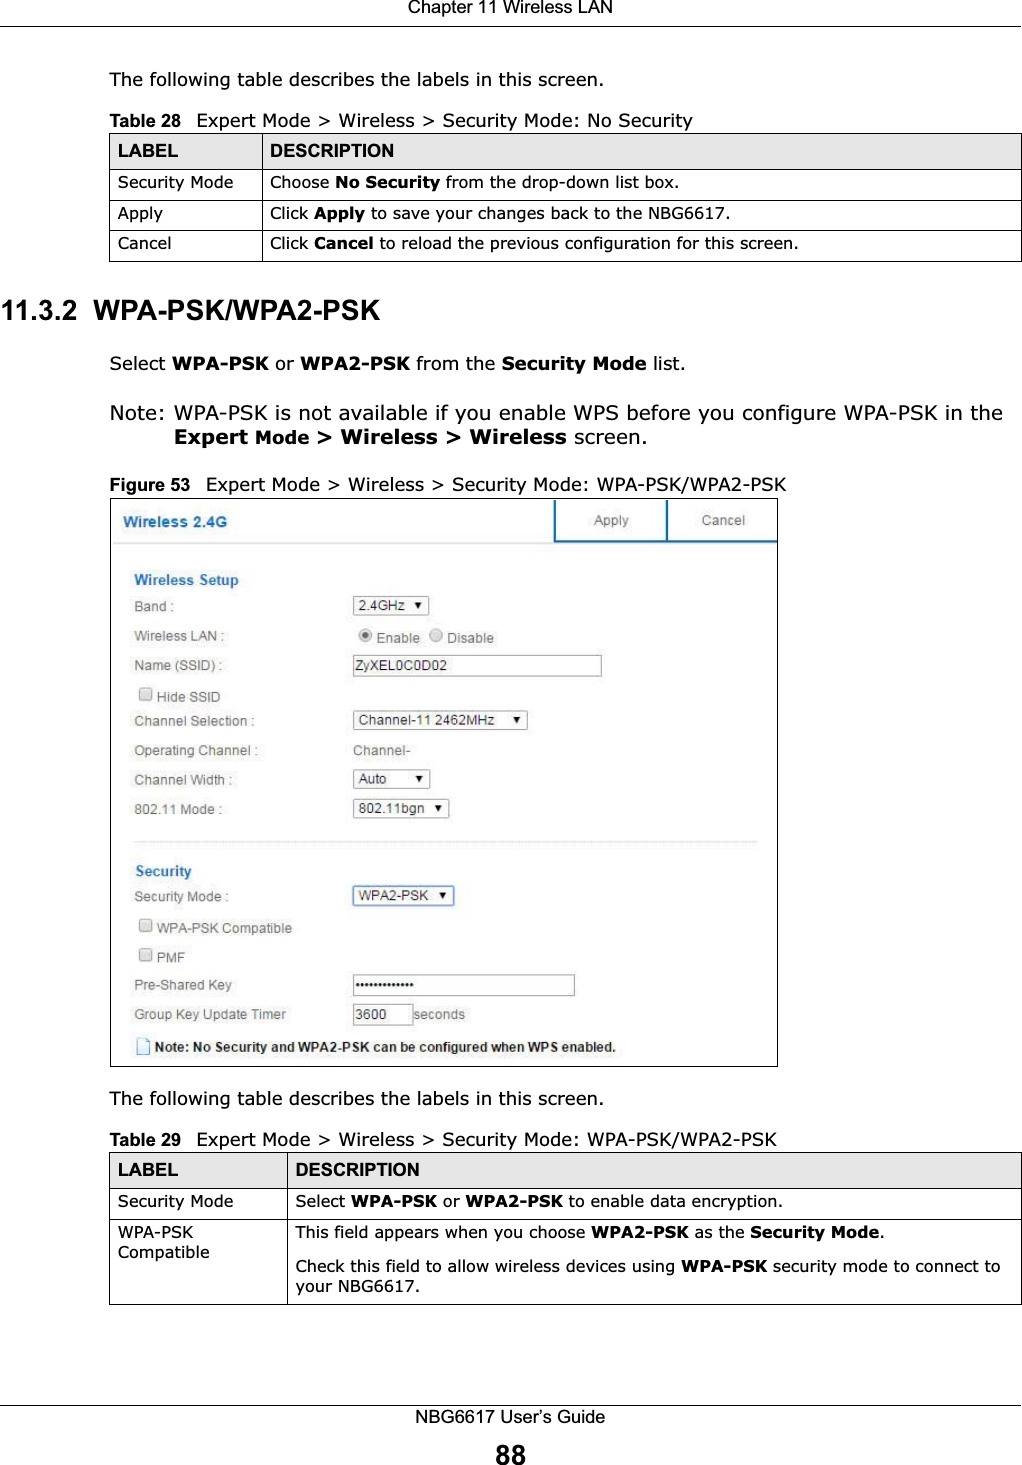 Chapter 11 Wireless LANNBG6617 User’s Guide88The following table describes the labels in this screen.11.3.2  WPA-PSK/WPA2-PSKSelect WPA-PSK or WPA2-PSK from the Security Mode list.Note: WPA-PSK is not available if you enable WPS before you configure WPA-PSK in the Expert Mode &gt; Wireless &gt; Wireless screen.Figure 53   Expert Mode &gt; Wireless &gt; Security Mode: WPA-PSK/WPA2-PSKThe following table describes the labels in this screen.Table 28   Expert Mode &gt; Wireless &gt; Security Mode: No SecurityLABEL DESCRIPTIONSecurity Mode Choose No Security from the drop-down list box.Apply Click Apply to save your changes back to the NBG6617.Cancel Click Cancel to reload the previous configuration for this screen.Table 29   Expert Mode &gt; Wireless &gt; Security Mode: WPA-PSK/WPA2-PSKLABEL DESCRIPTIONSecurity Mode Select WPA-PSK or WPA2-PSK to enable data encryption.WPA-PSK CompatibleThis field appears when you choose WPA2-PSK as the Security Mode.Check this field to allow wireless devices using WPA-PSK security mode to connect to your NBG6617.